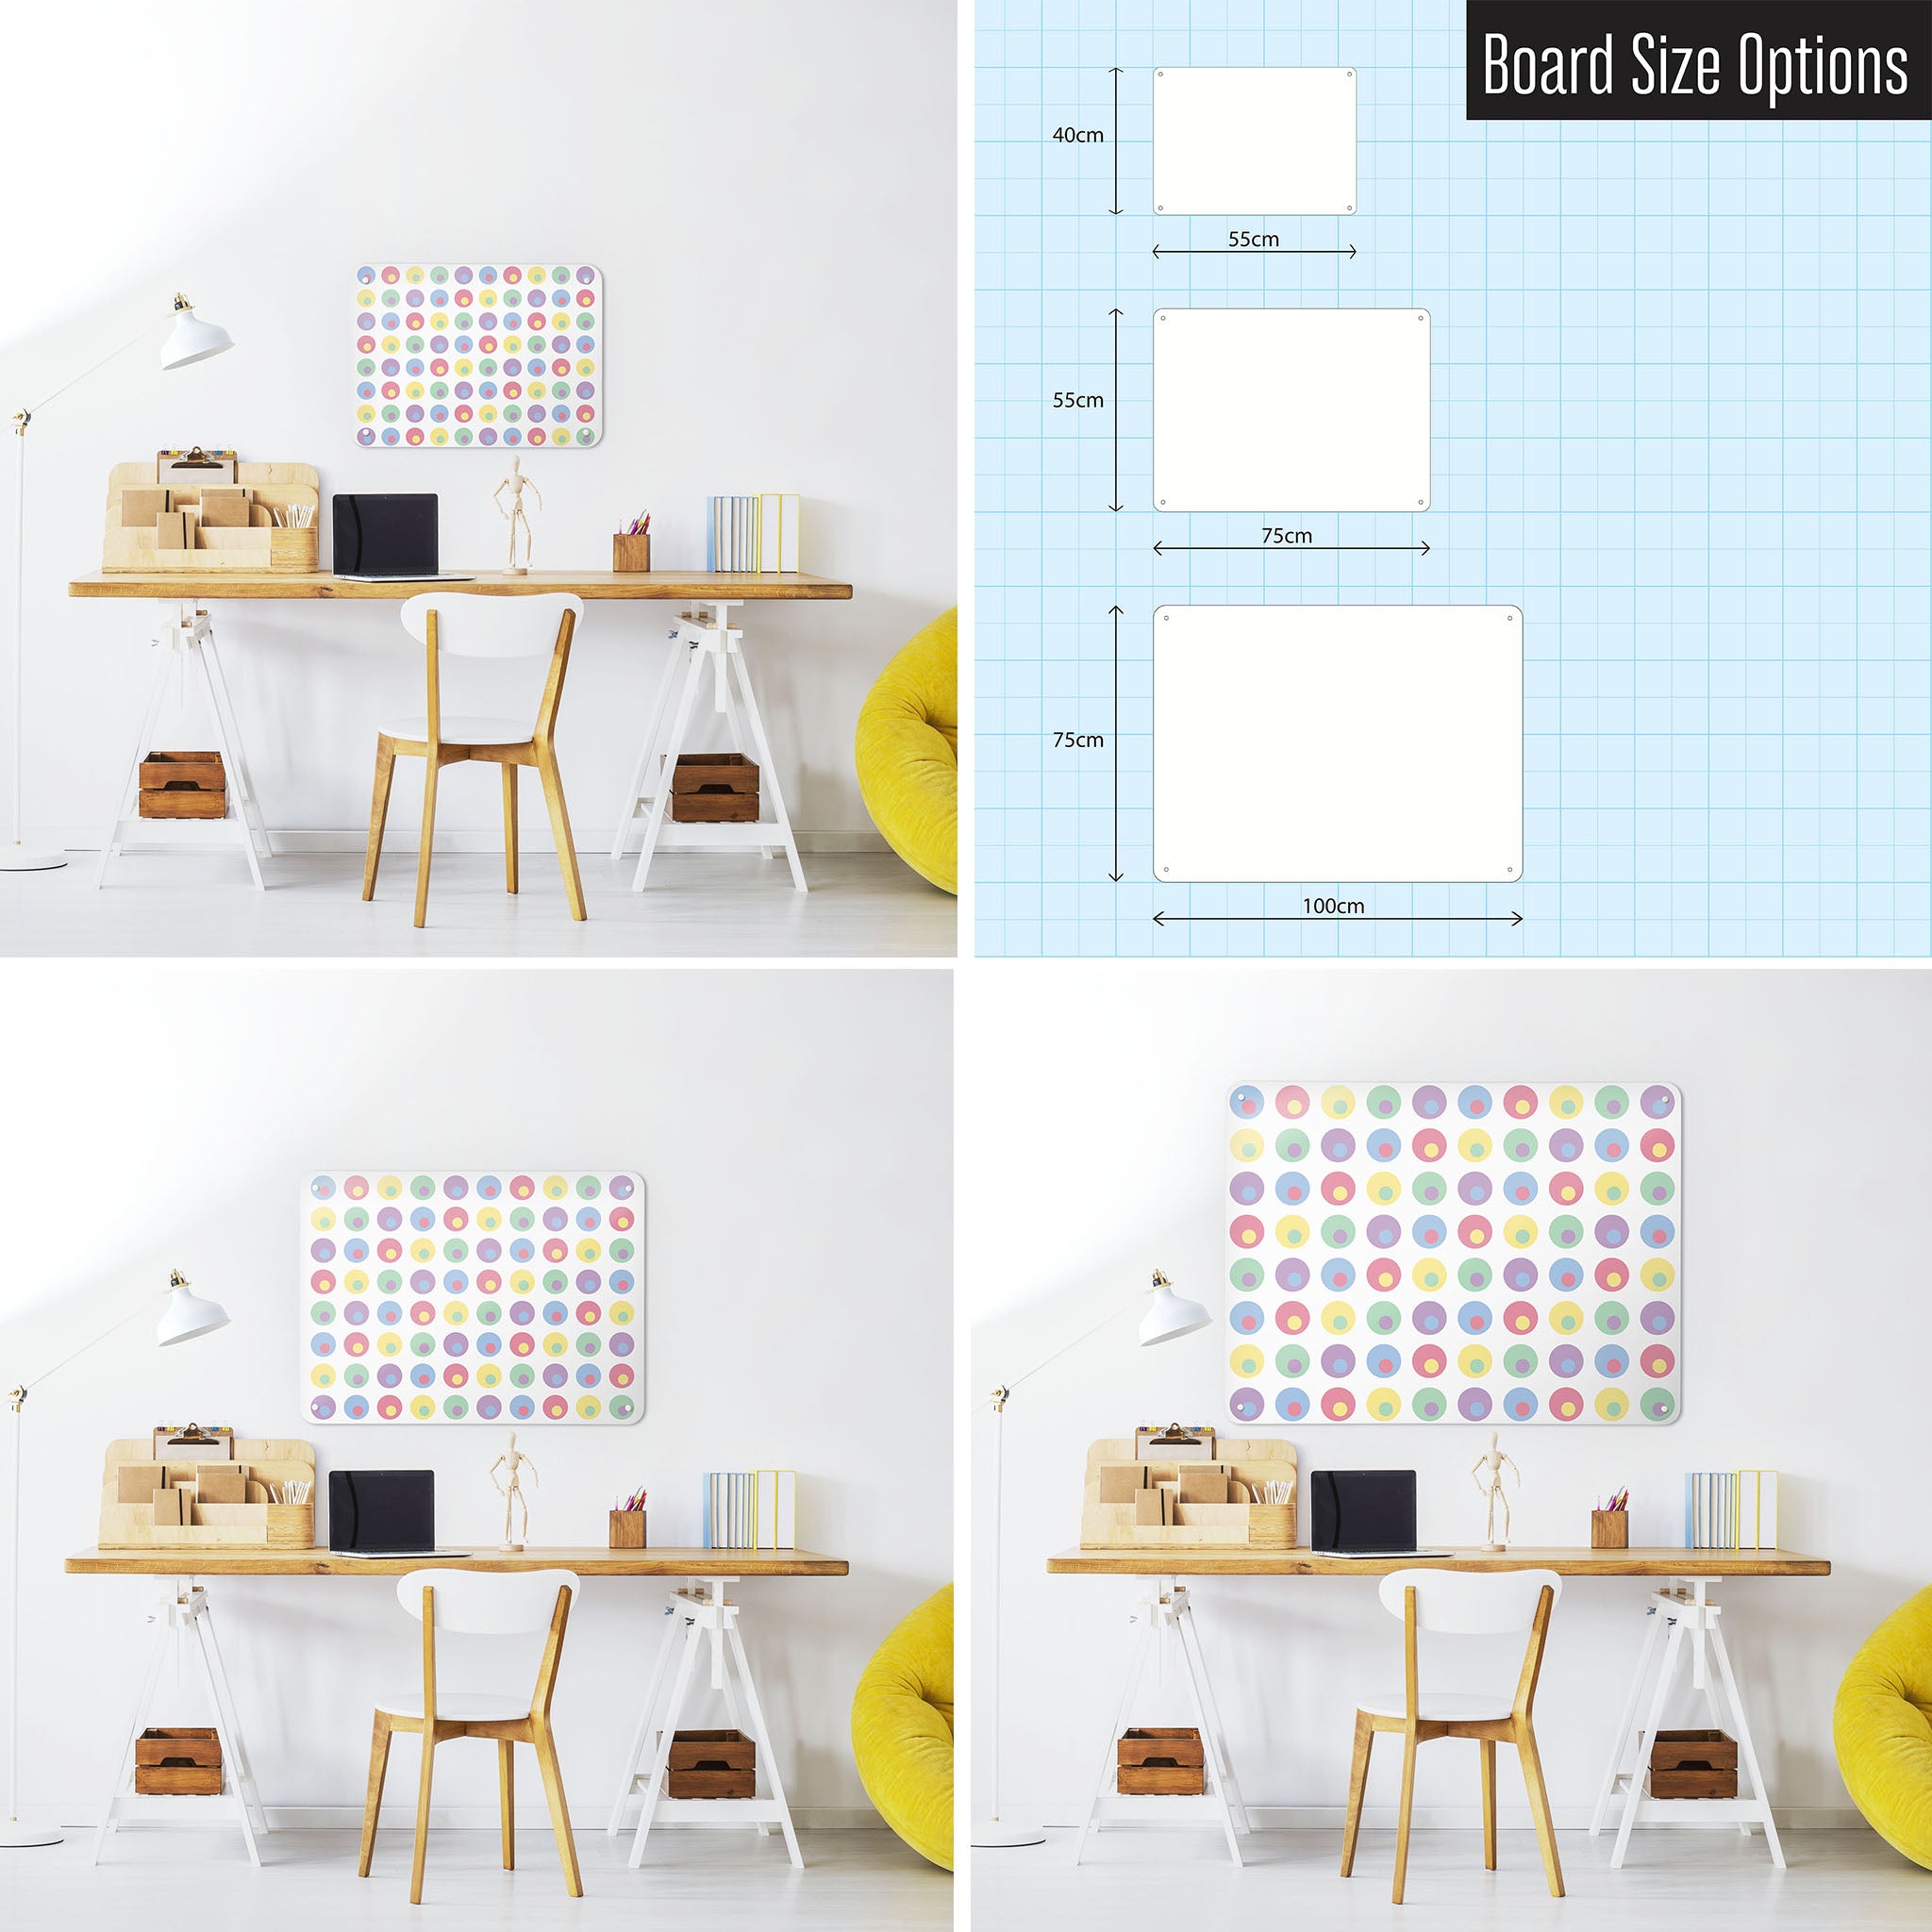 Three photographs of a workspace interior and a diagram to show size comparisons of a spots design magnetic notice board